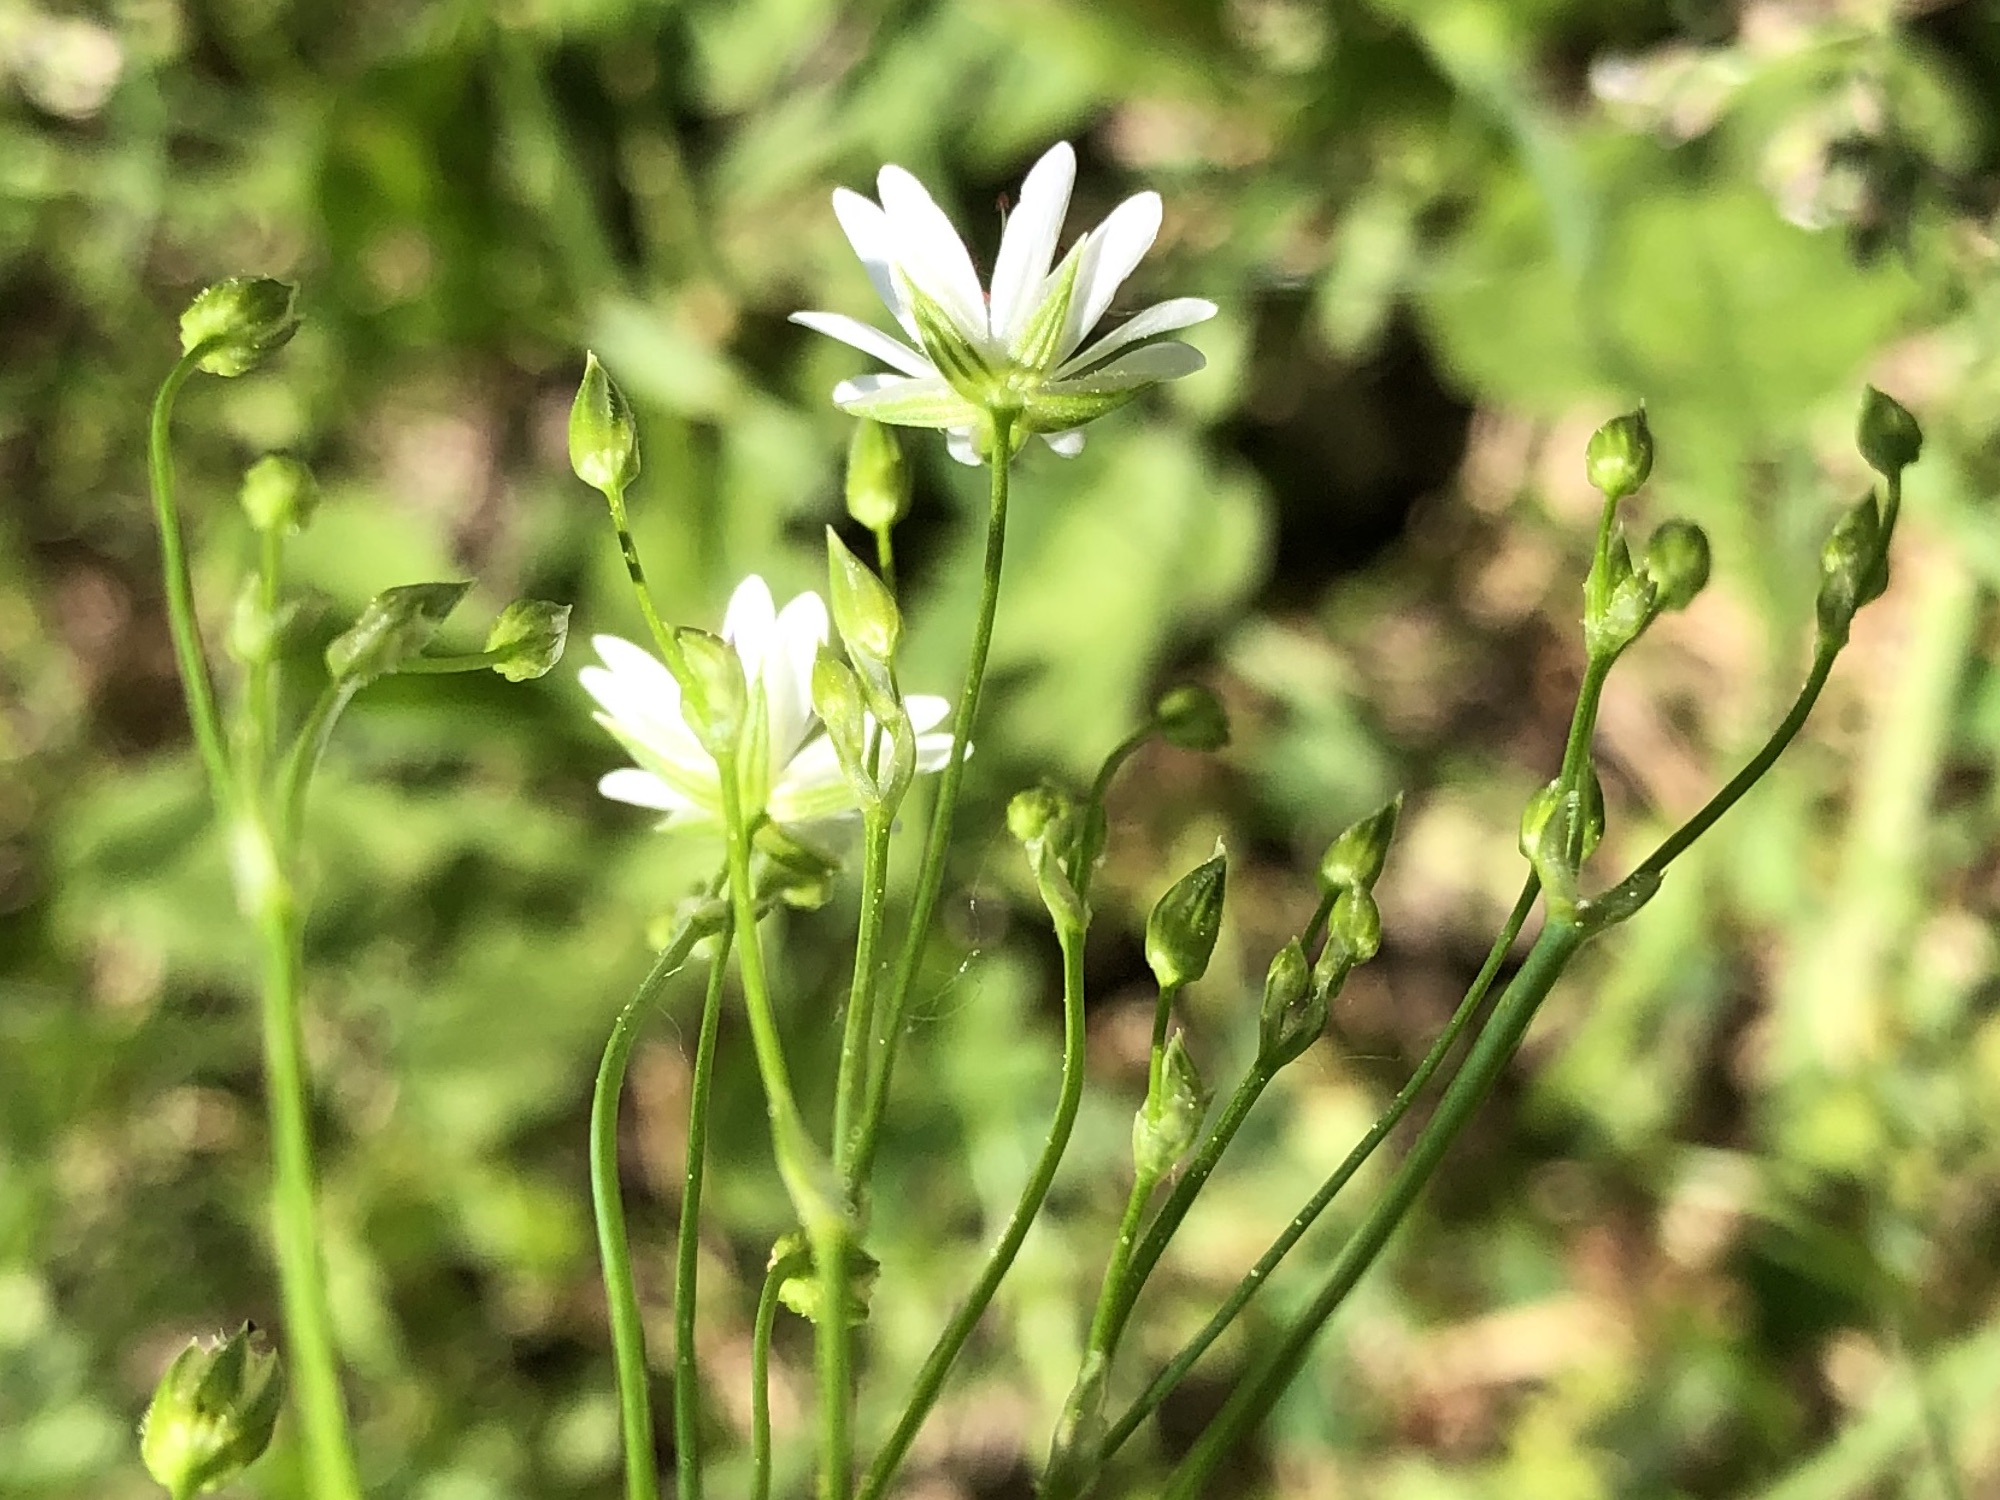 Five green sepals of Common Stitchwort in a grassy clearing along the bike path between Odana Road and Midvale Boulevard in Madison, Wisconsin on June 3, 2022.